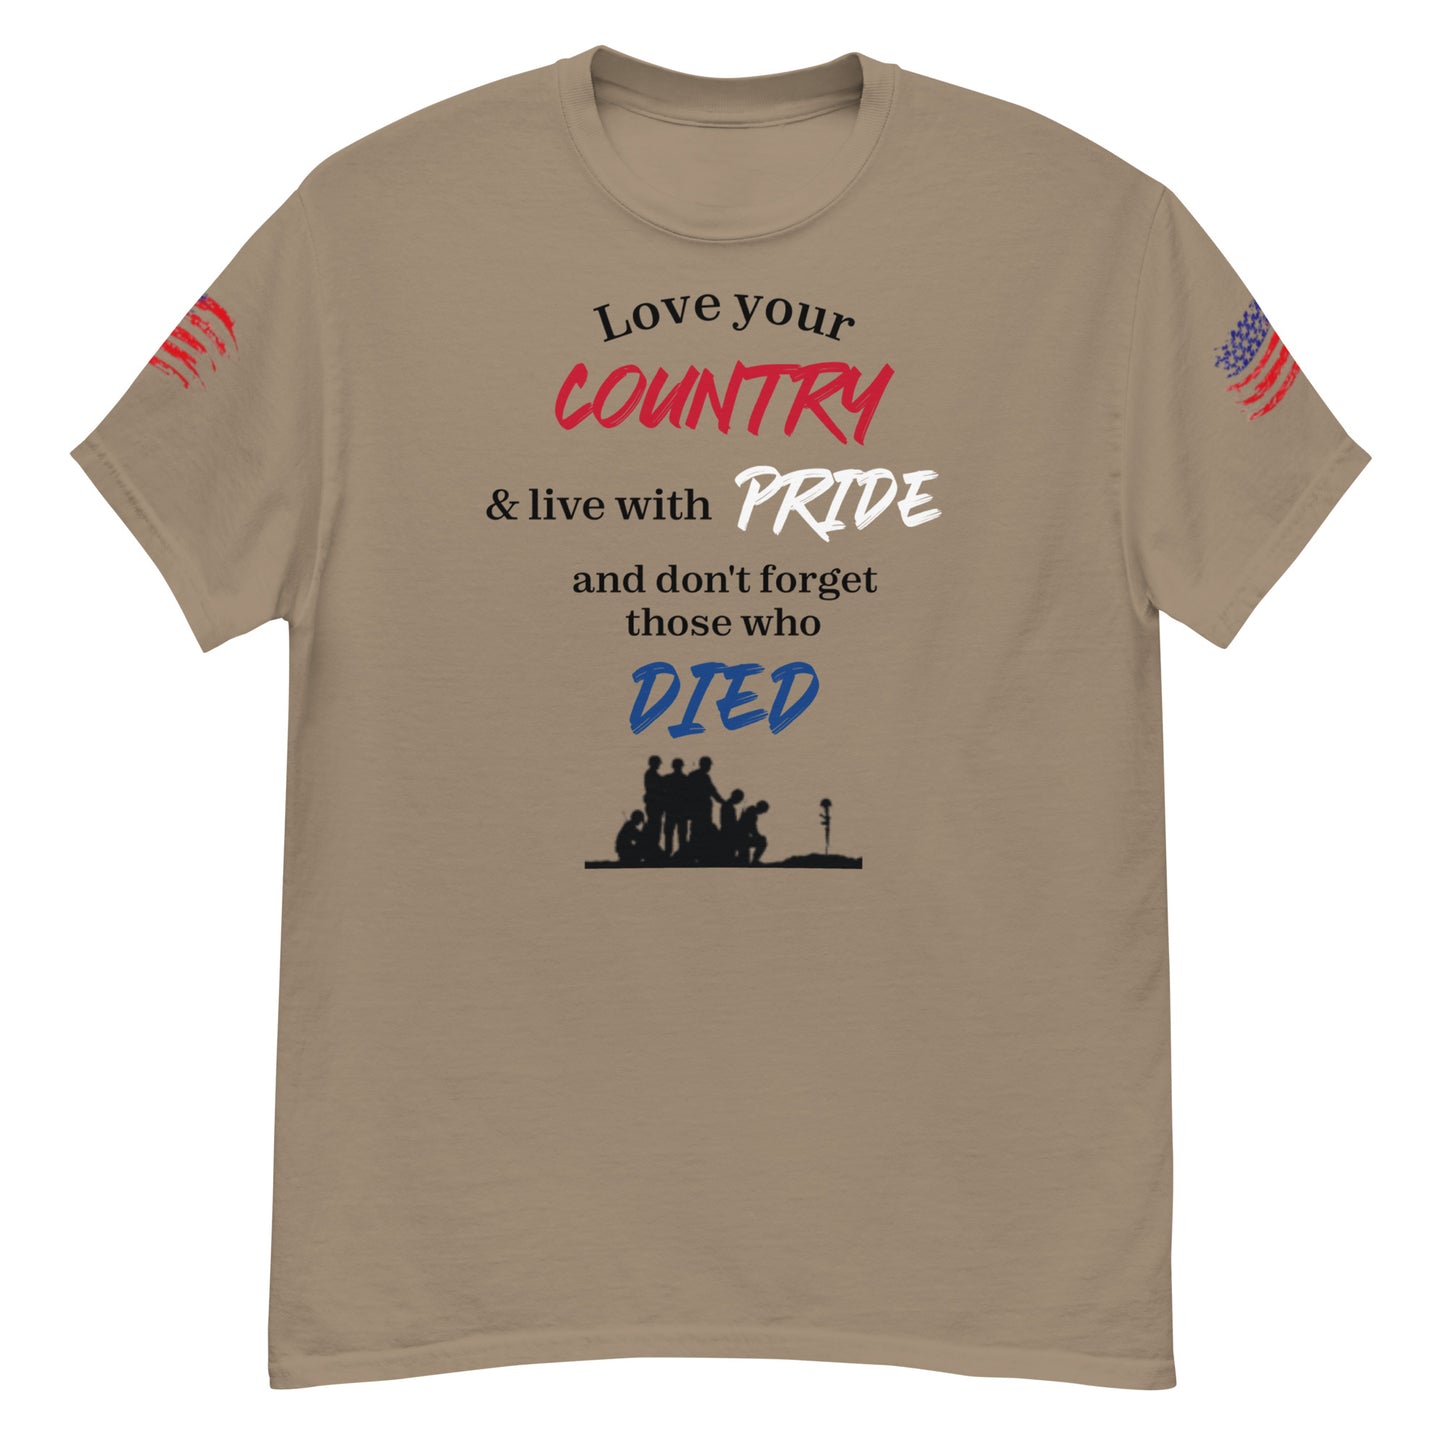 Love your country & live with pride classic tee